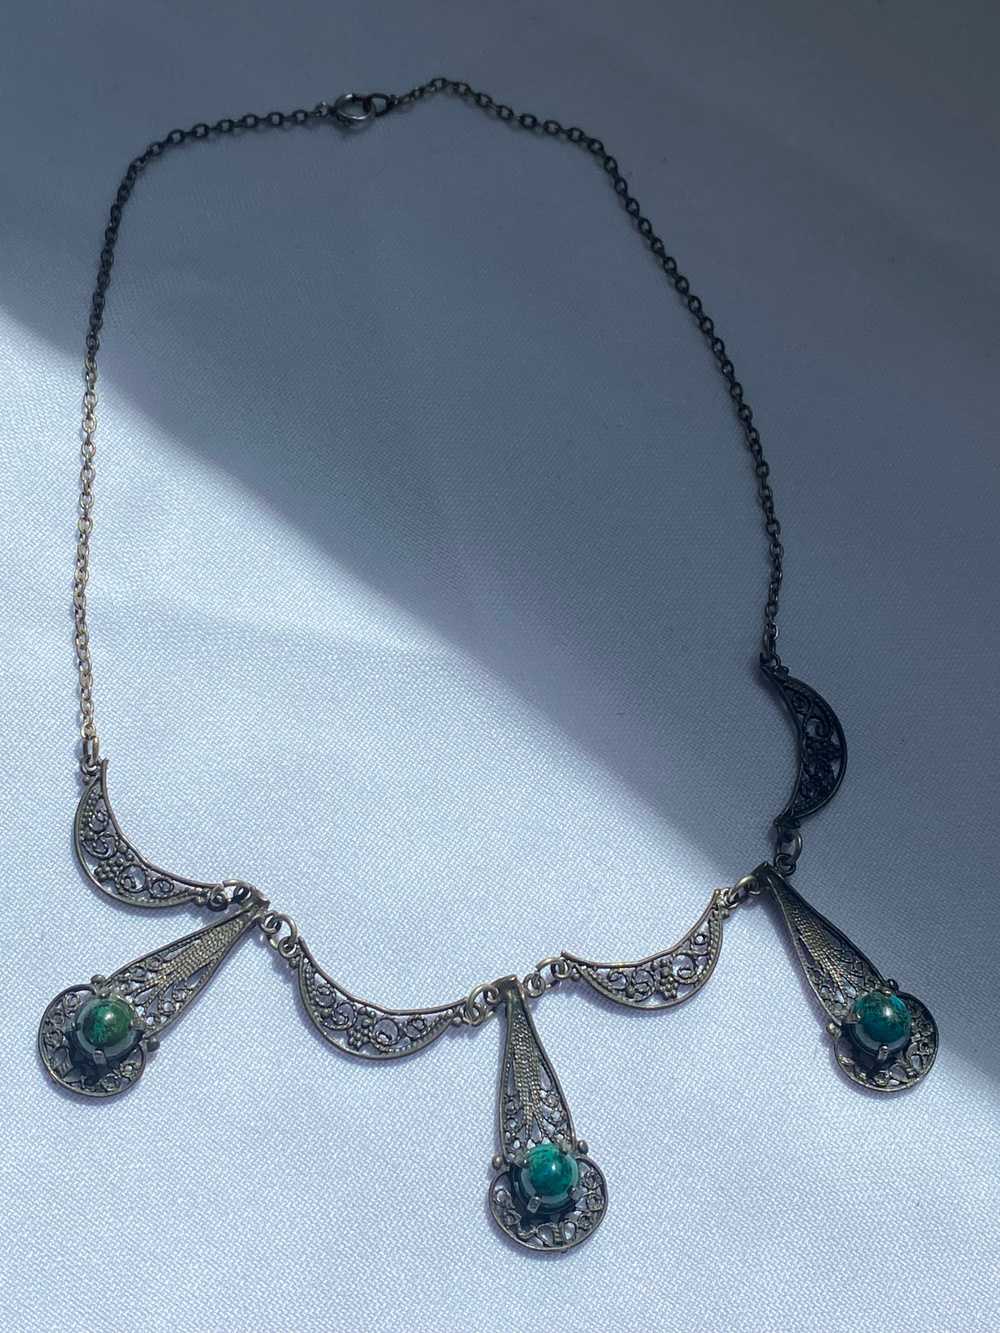 Sterling filigree with Green Stone Necklace - image 1